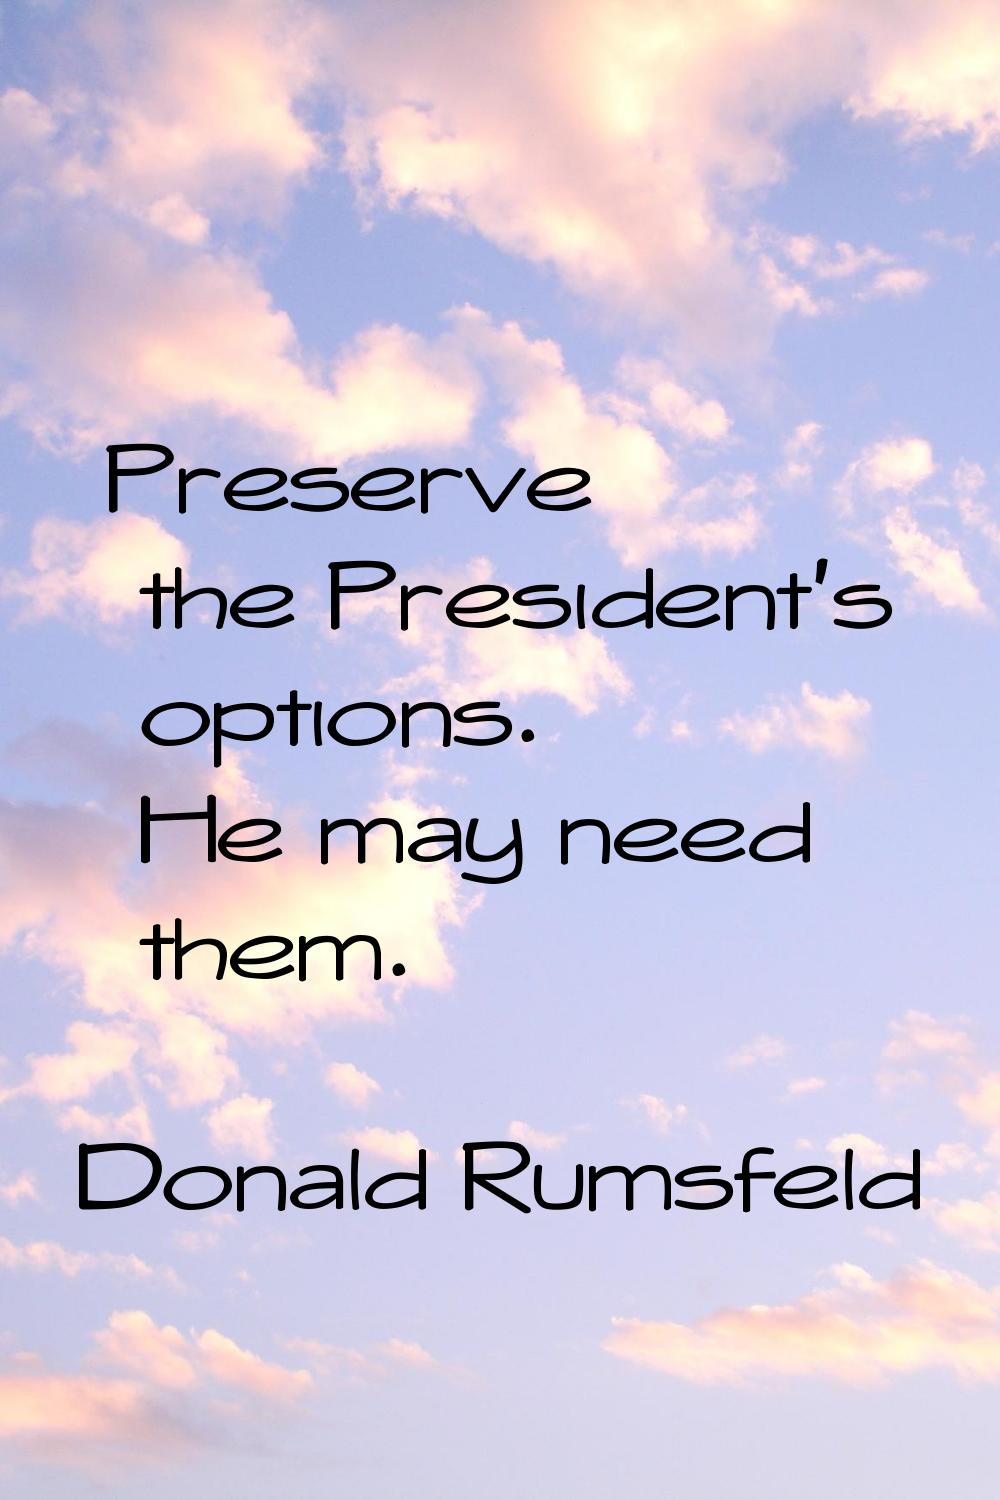 Preserve the President's options. He may need them.